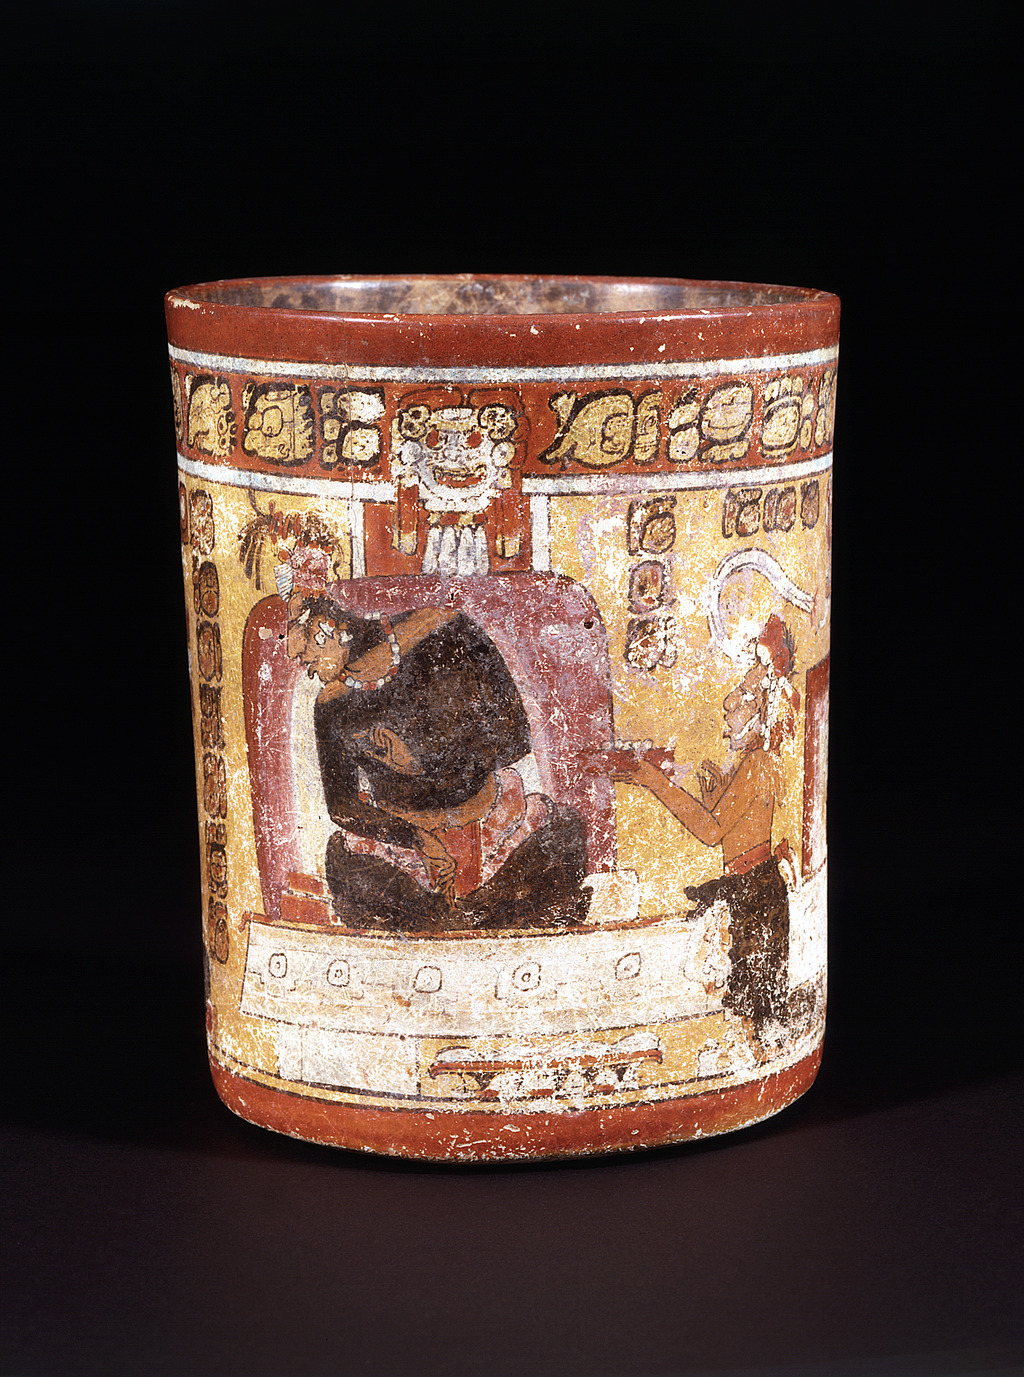 Drinking Vessel with a Palace Scene, Maya, 650-750CE, signed by Kuluub as painter. Terracotta. Dumbarton Oaks Research Library and Collection, Pre-Columbian Collection, Washington, D.C. Photo by Justin Kerr. Justin Kerr Maya archive, Dumbarton Oaks, Trustees for Harvard University, Washington, D.C